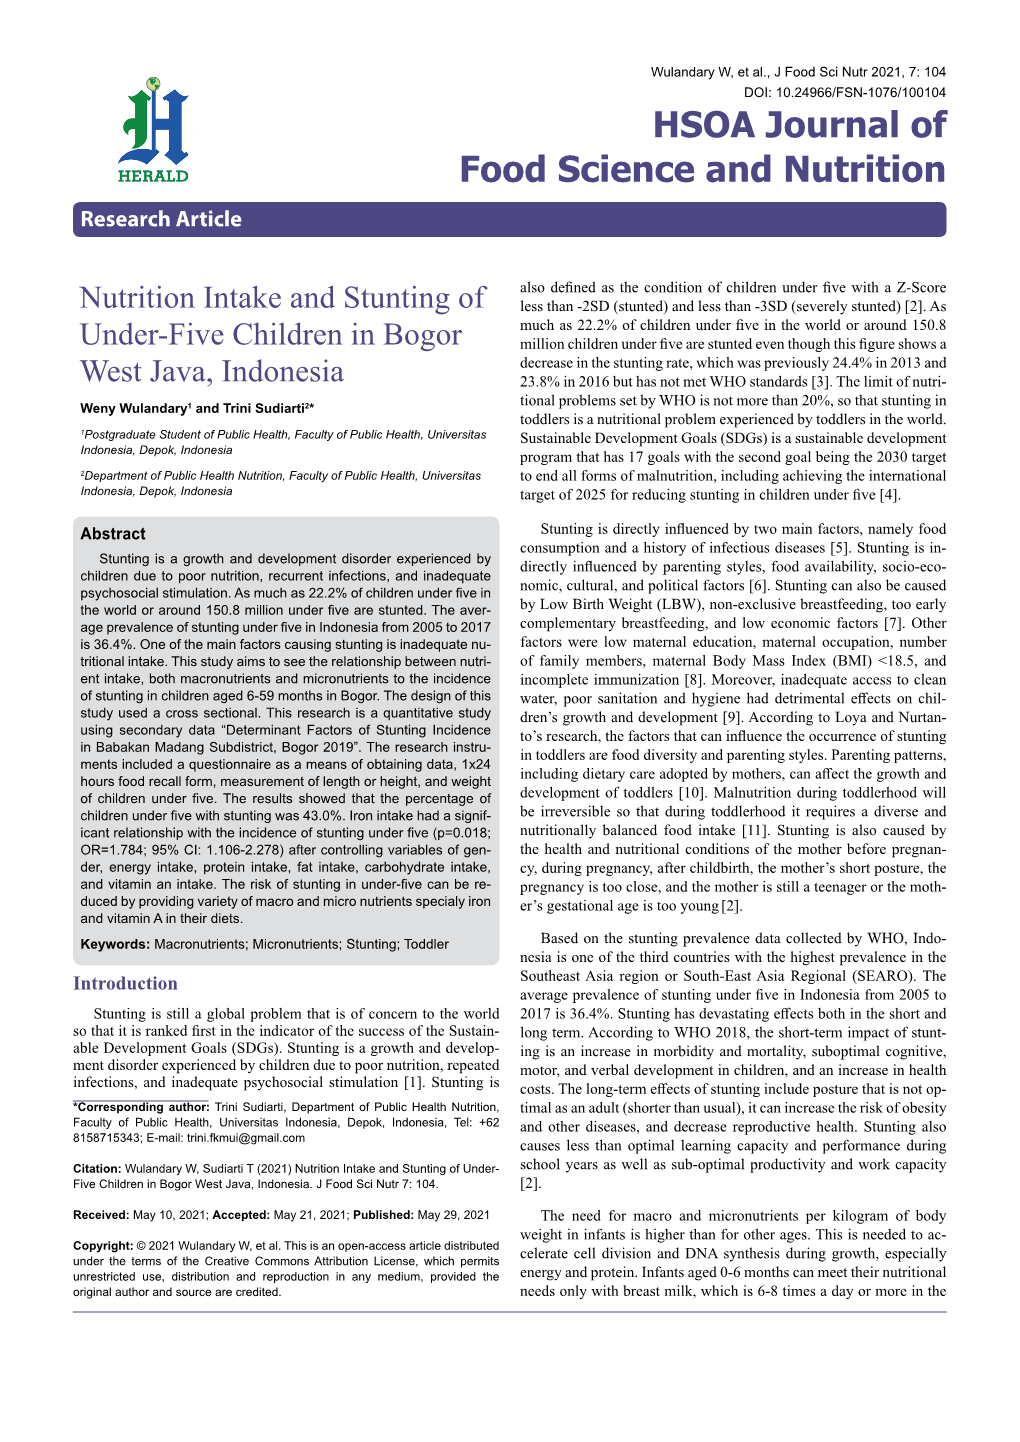 Nutrition Intake and Stunting of Under-Five Children in Bogor West Java, Indonesia